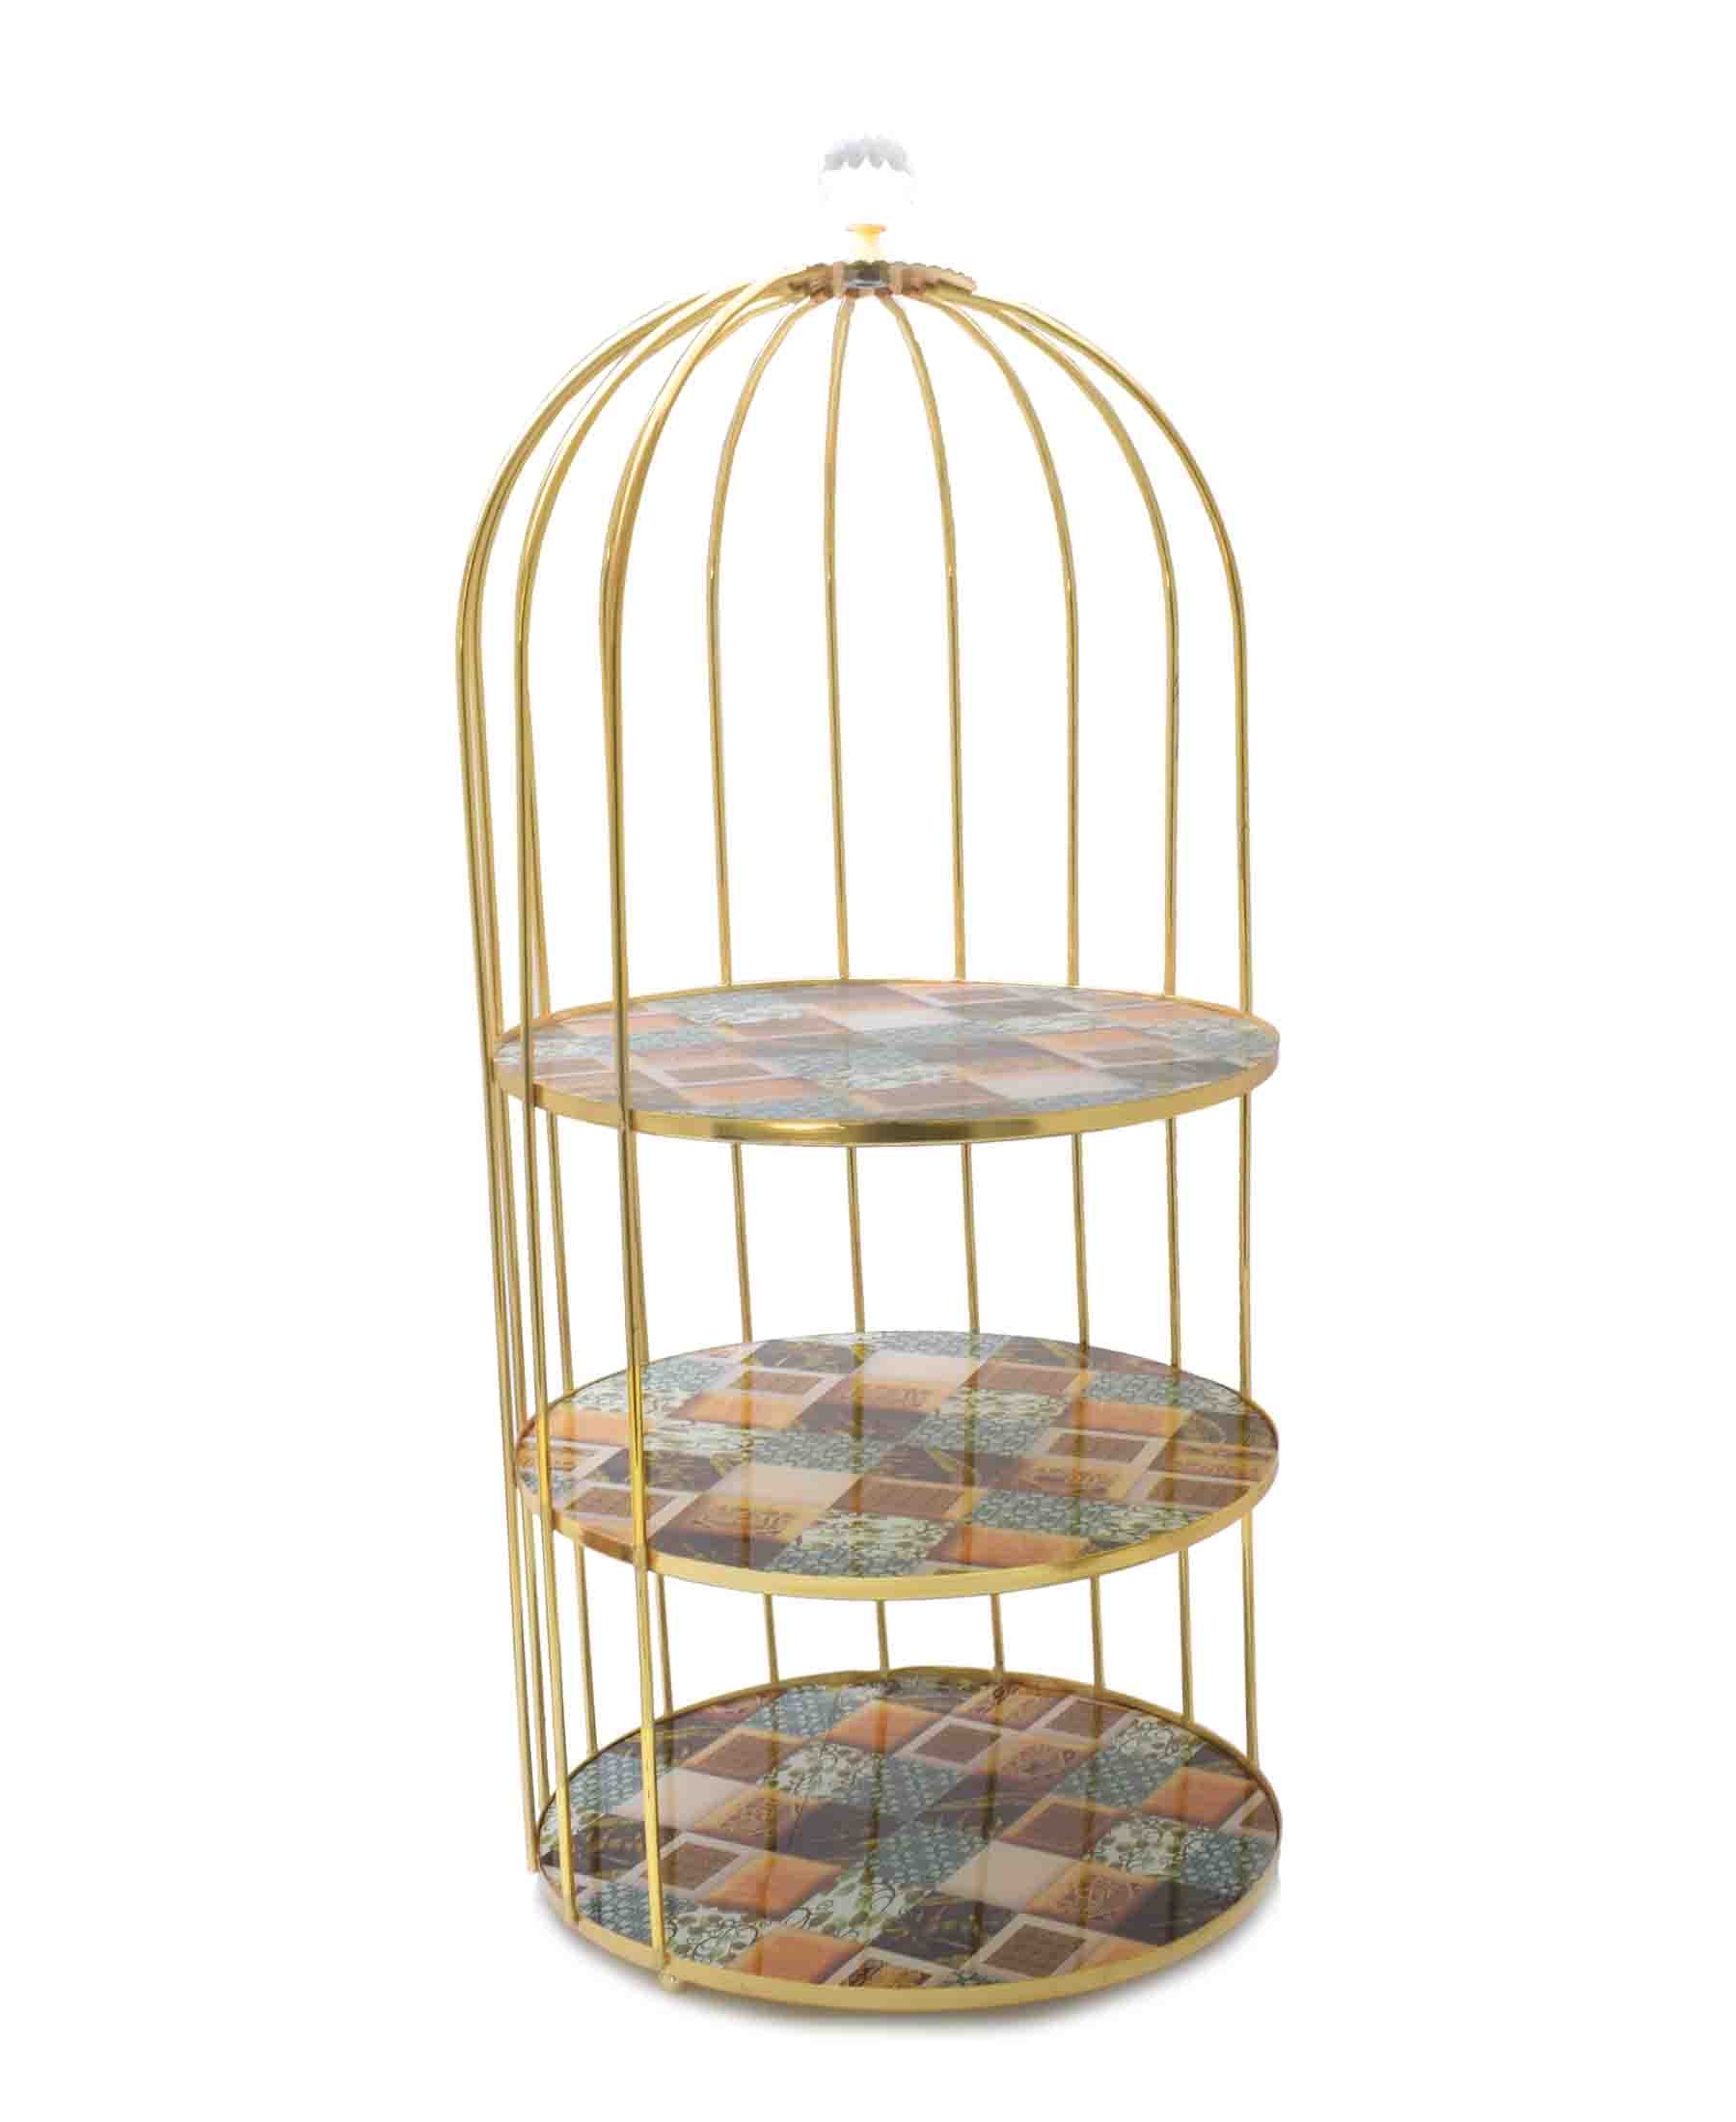 Bursa Collection 3 Tier Serving Stand - Gold